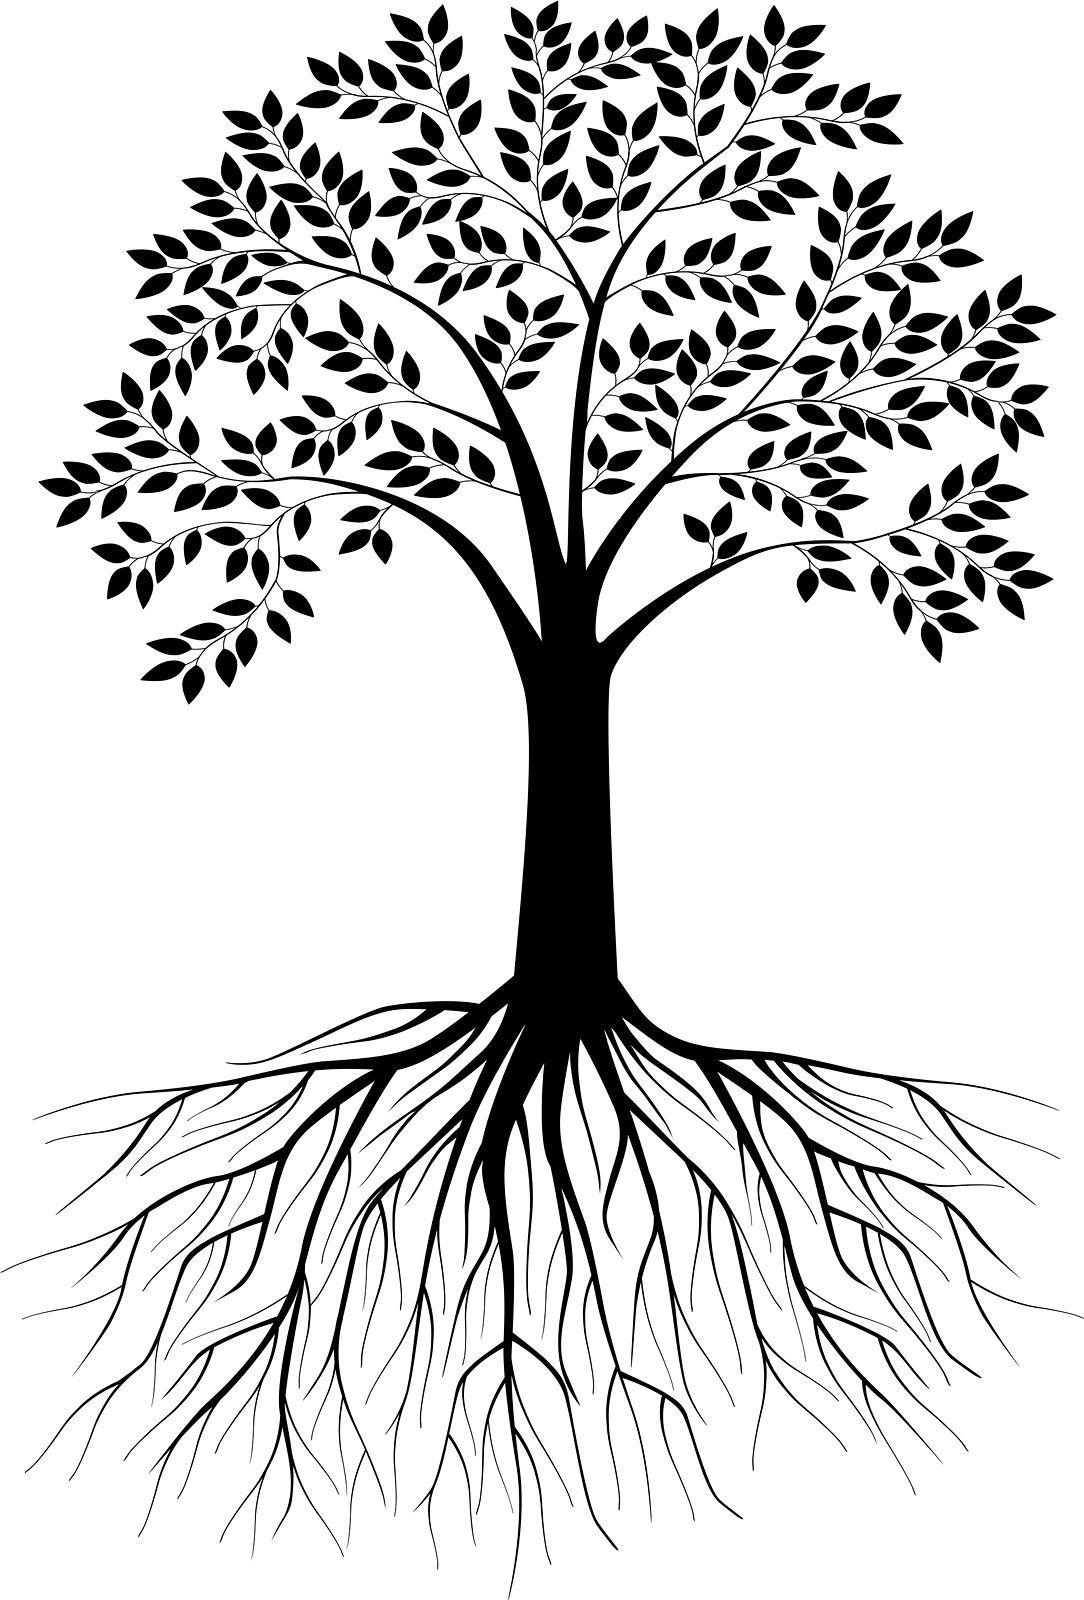 Black and White Tree Logo - Black and white tree silhouette with roots - VectorStock | Trees ...